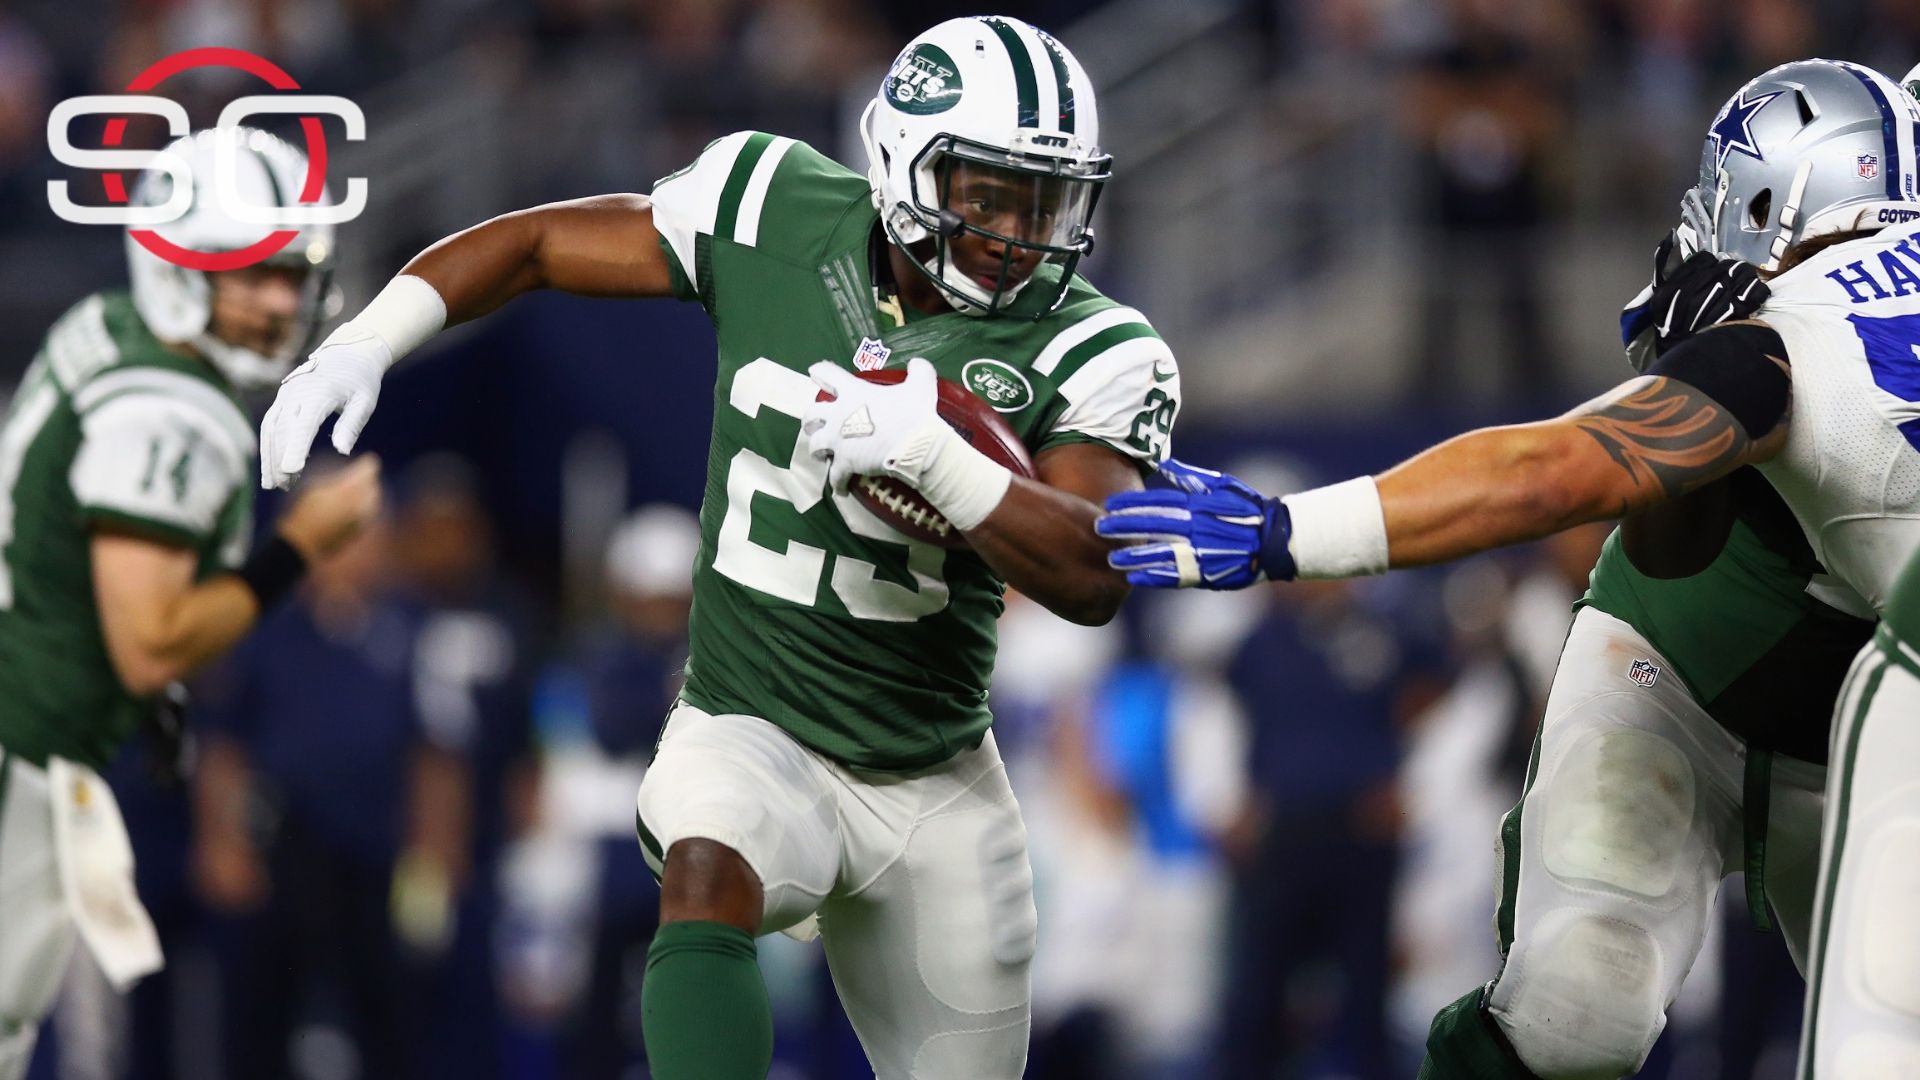 Jets reach deals with RBs Bilal Powell, Khiry Robinson - ABC7 Chicago